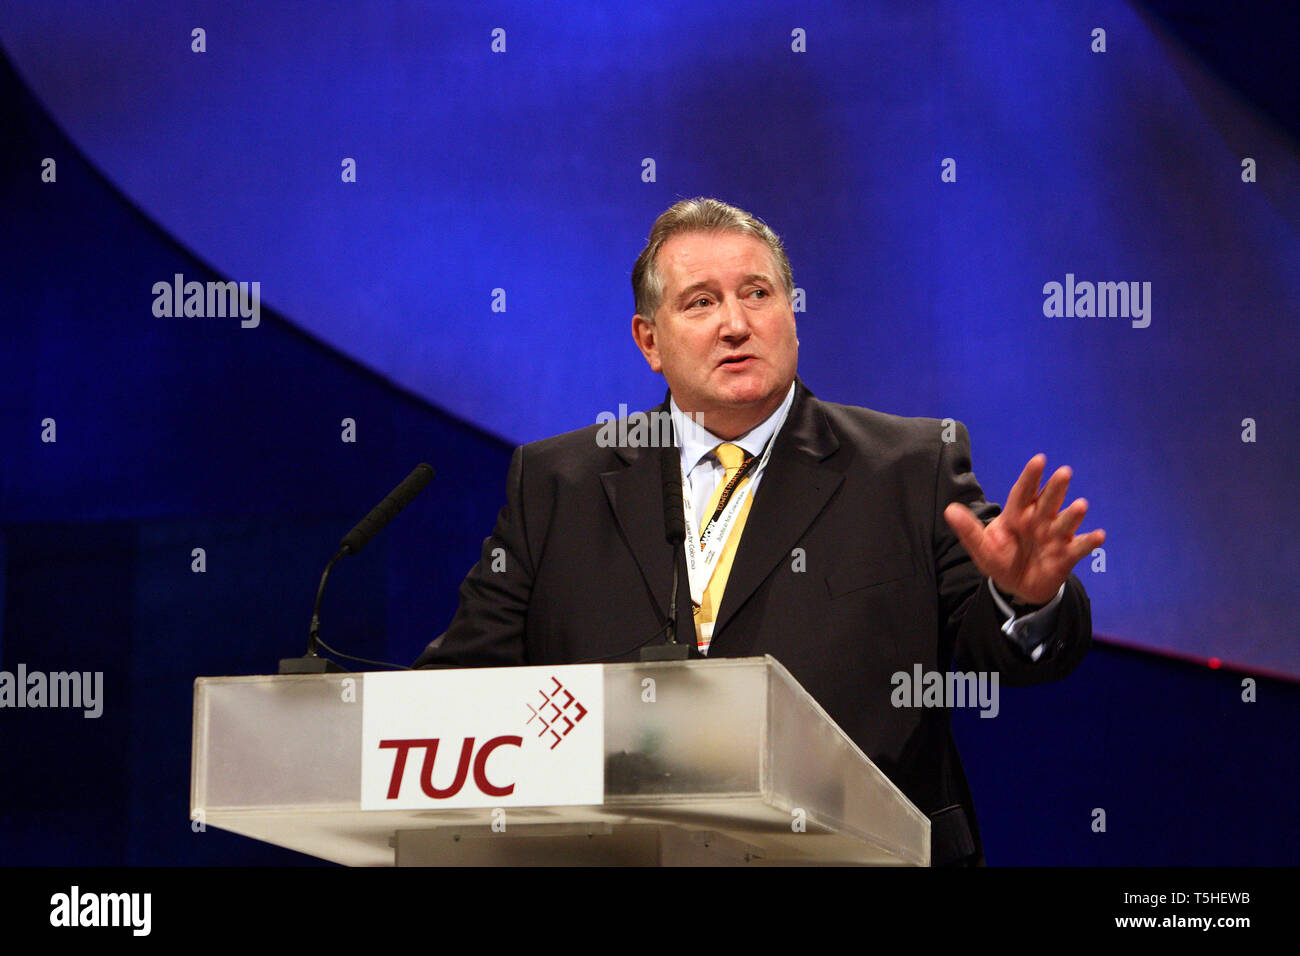 Paul Kenny GMB. TUC Conference, Manchester. 13 September 2010. Stock Photo